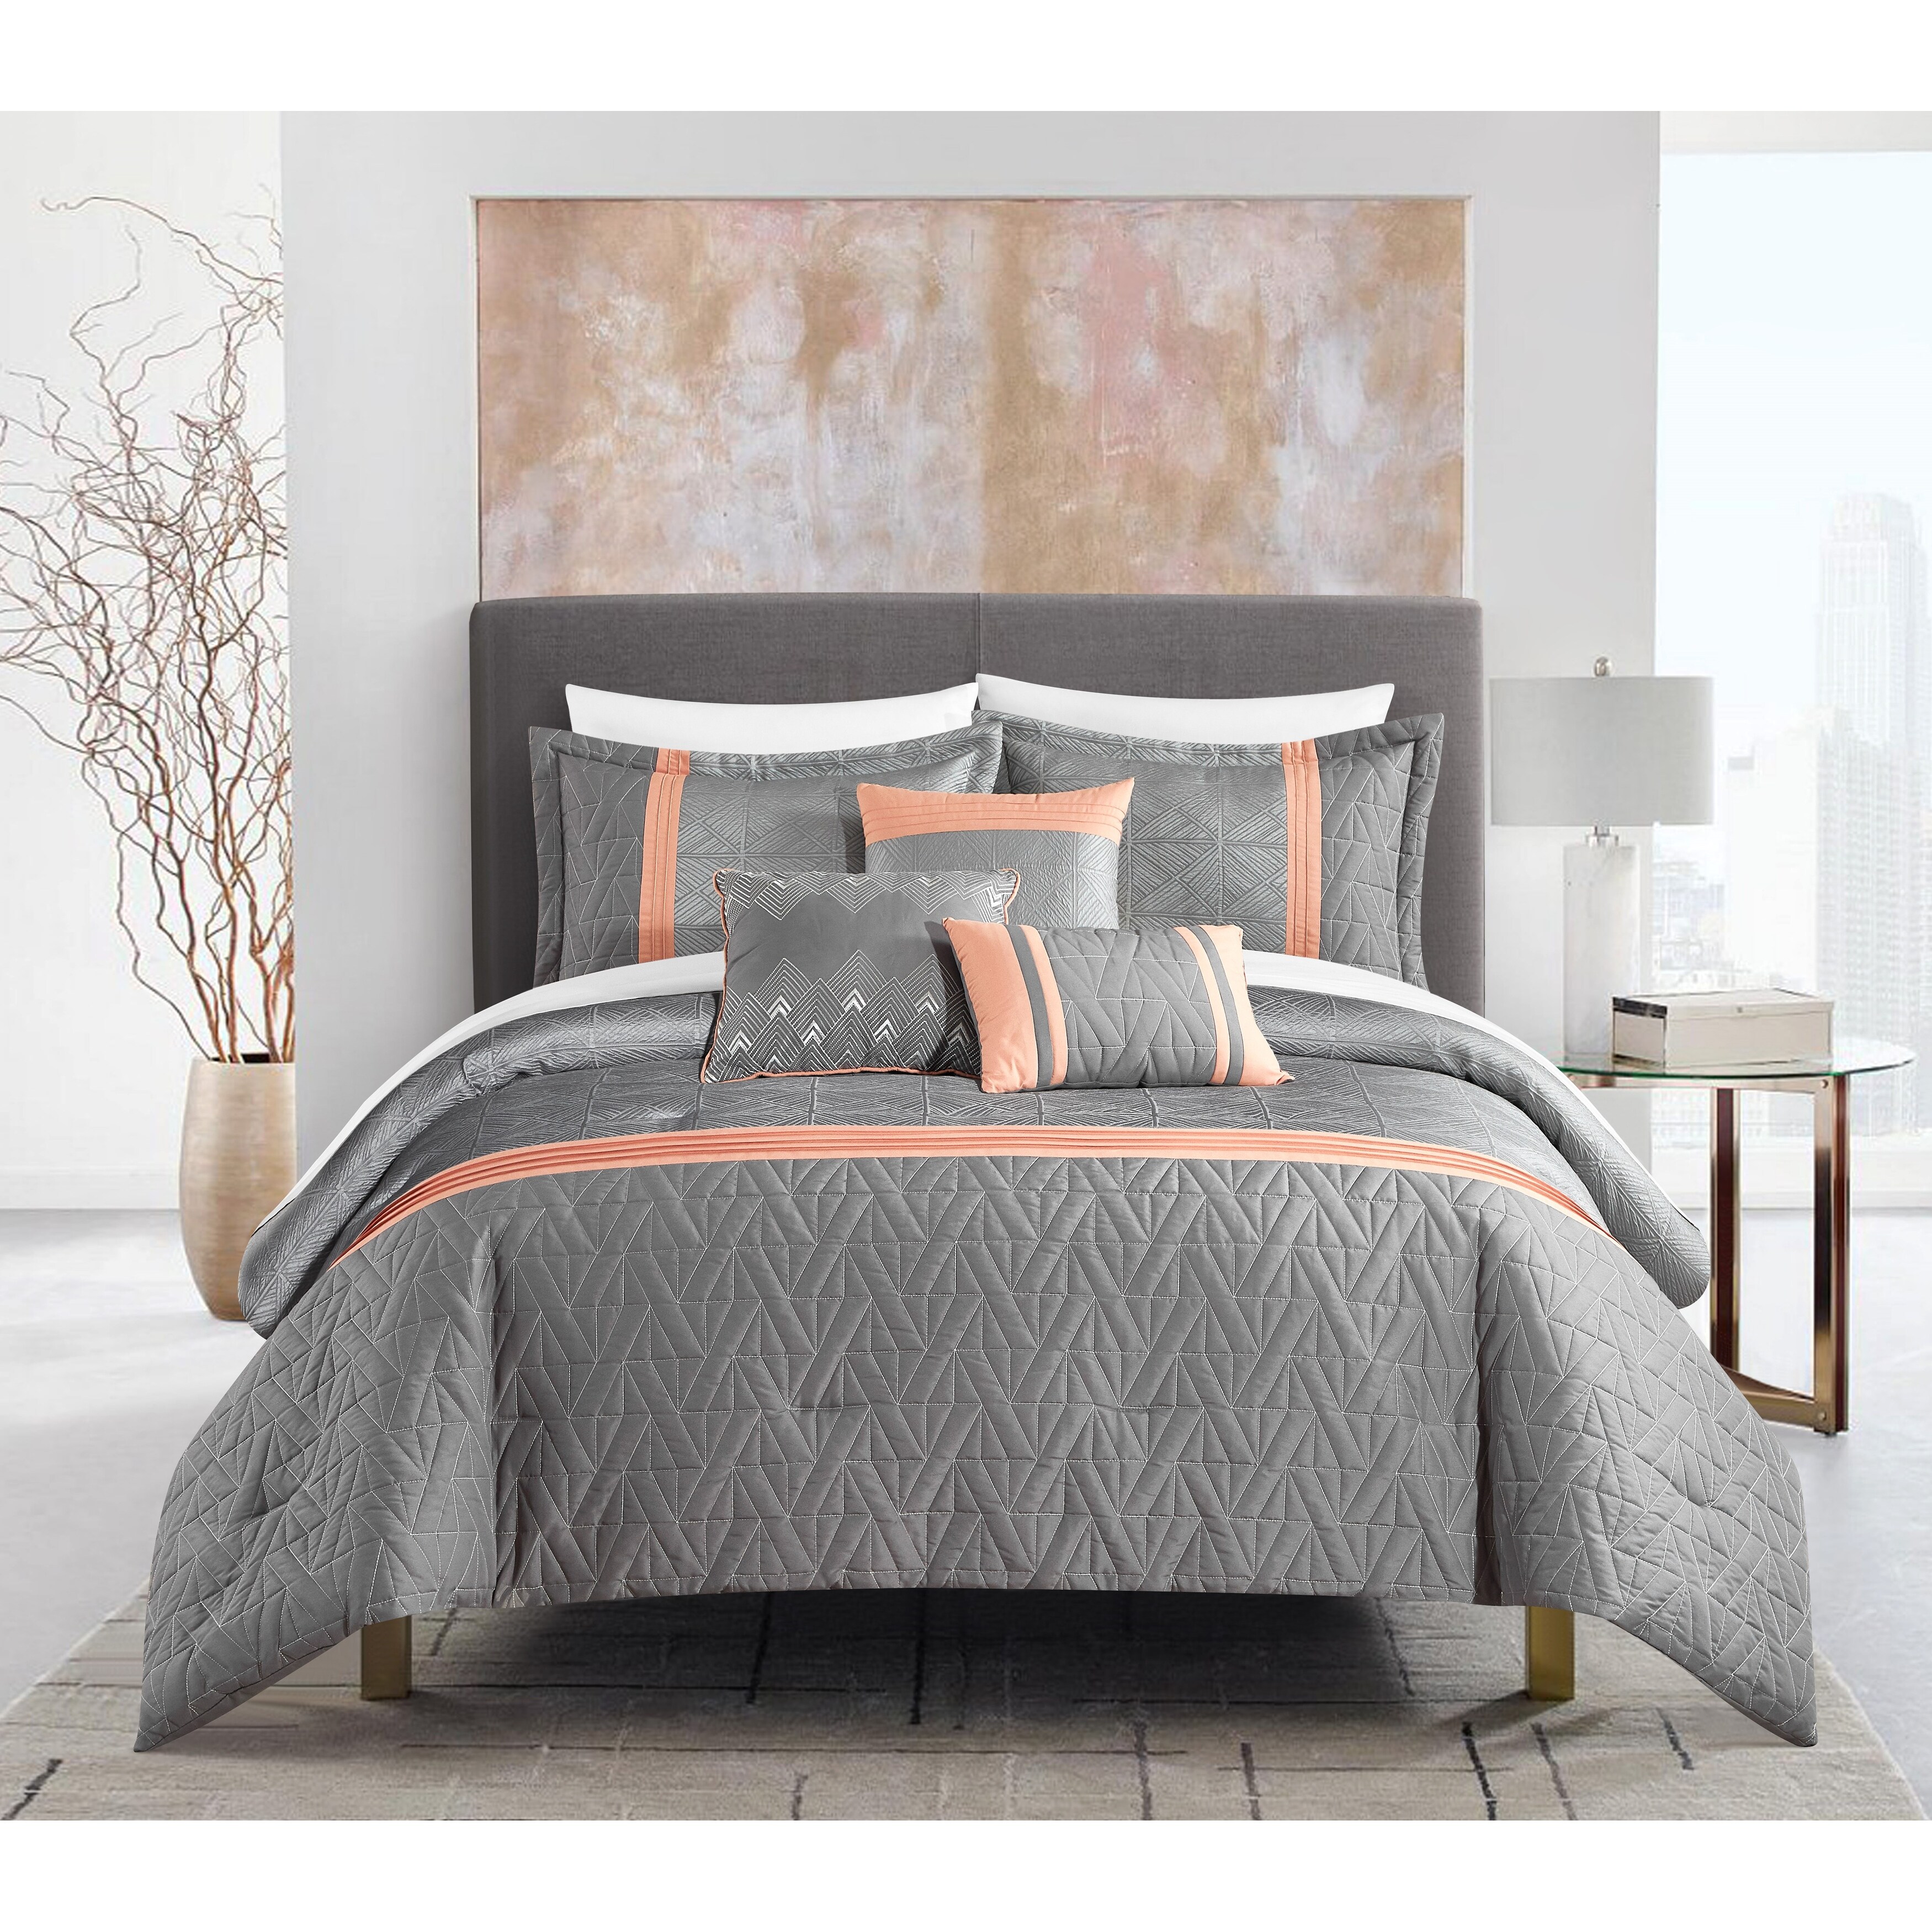 https://ak1.ostkcdn.com/images/products/is/images/direct/8c75c2307027bdb069b77cf7392368050d51891e/Chic-Home-Macy-10-Piece-Comforter-Set-Jacquard-Woven-Geometric-Design-Pleated-Quilted-Details-Bed-In-A-Bag-Bedding.jpg